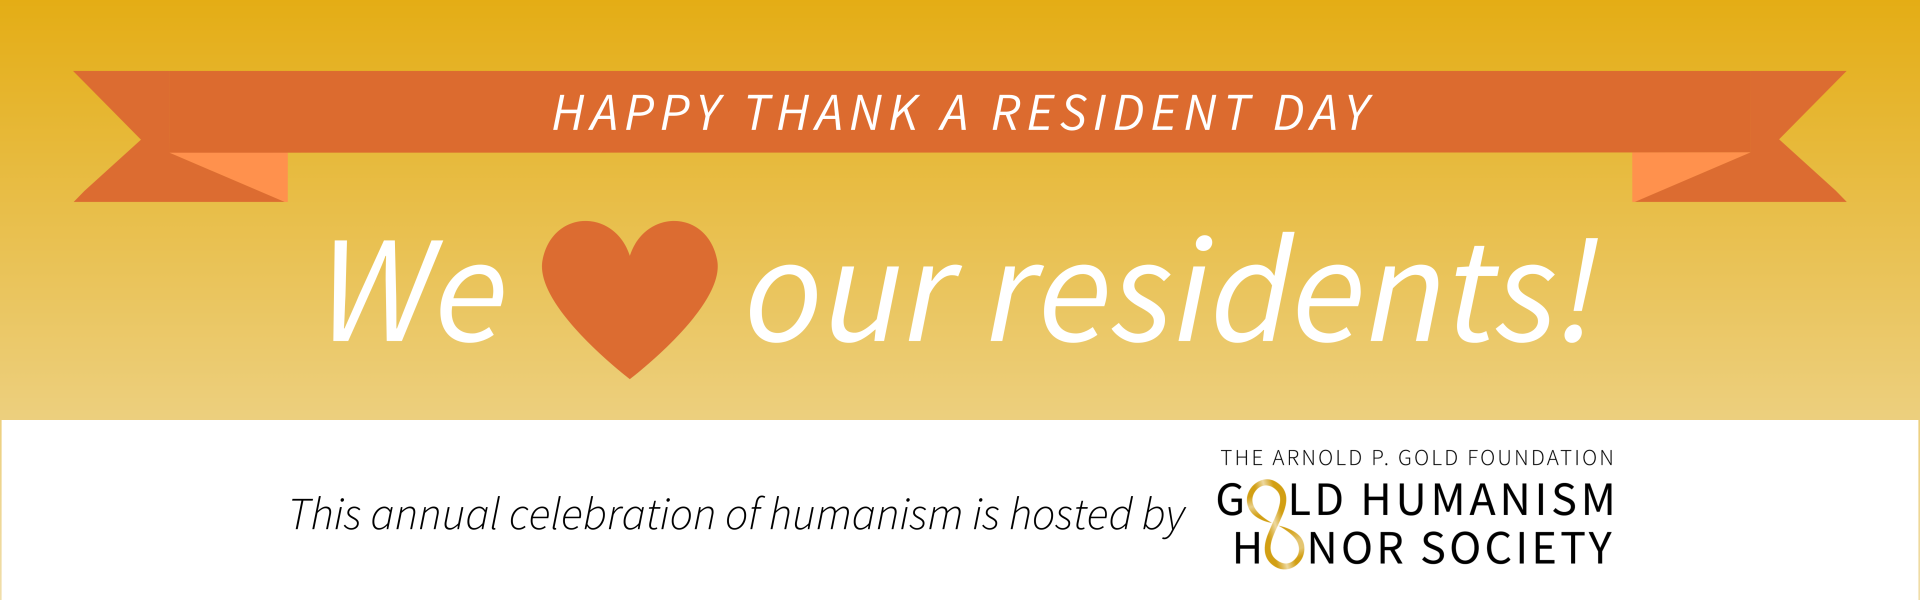 HAPPY THANK A RESIDENT DAY / WE (heart shape) our residents. This annual celebration of humanism is hosted by The Arnold P Gold Humanism Honor Society